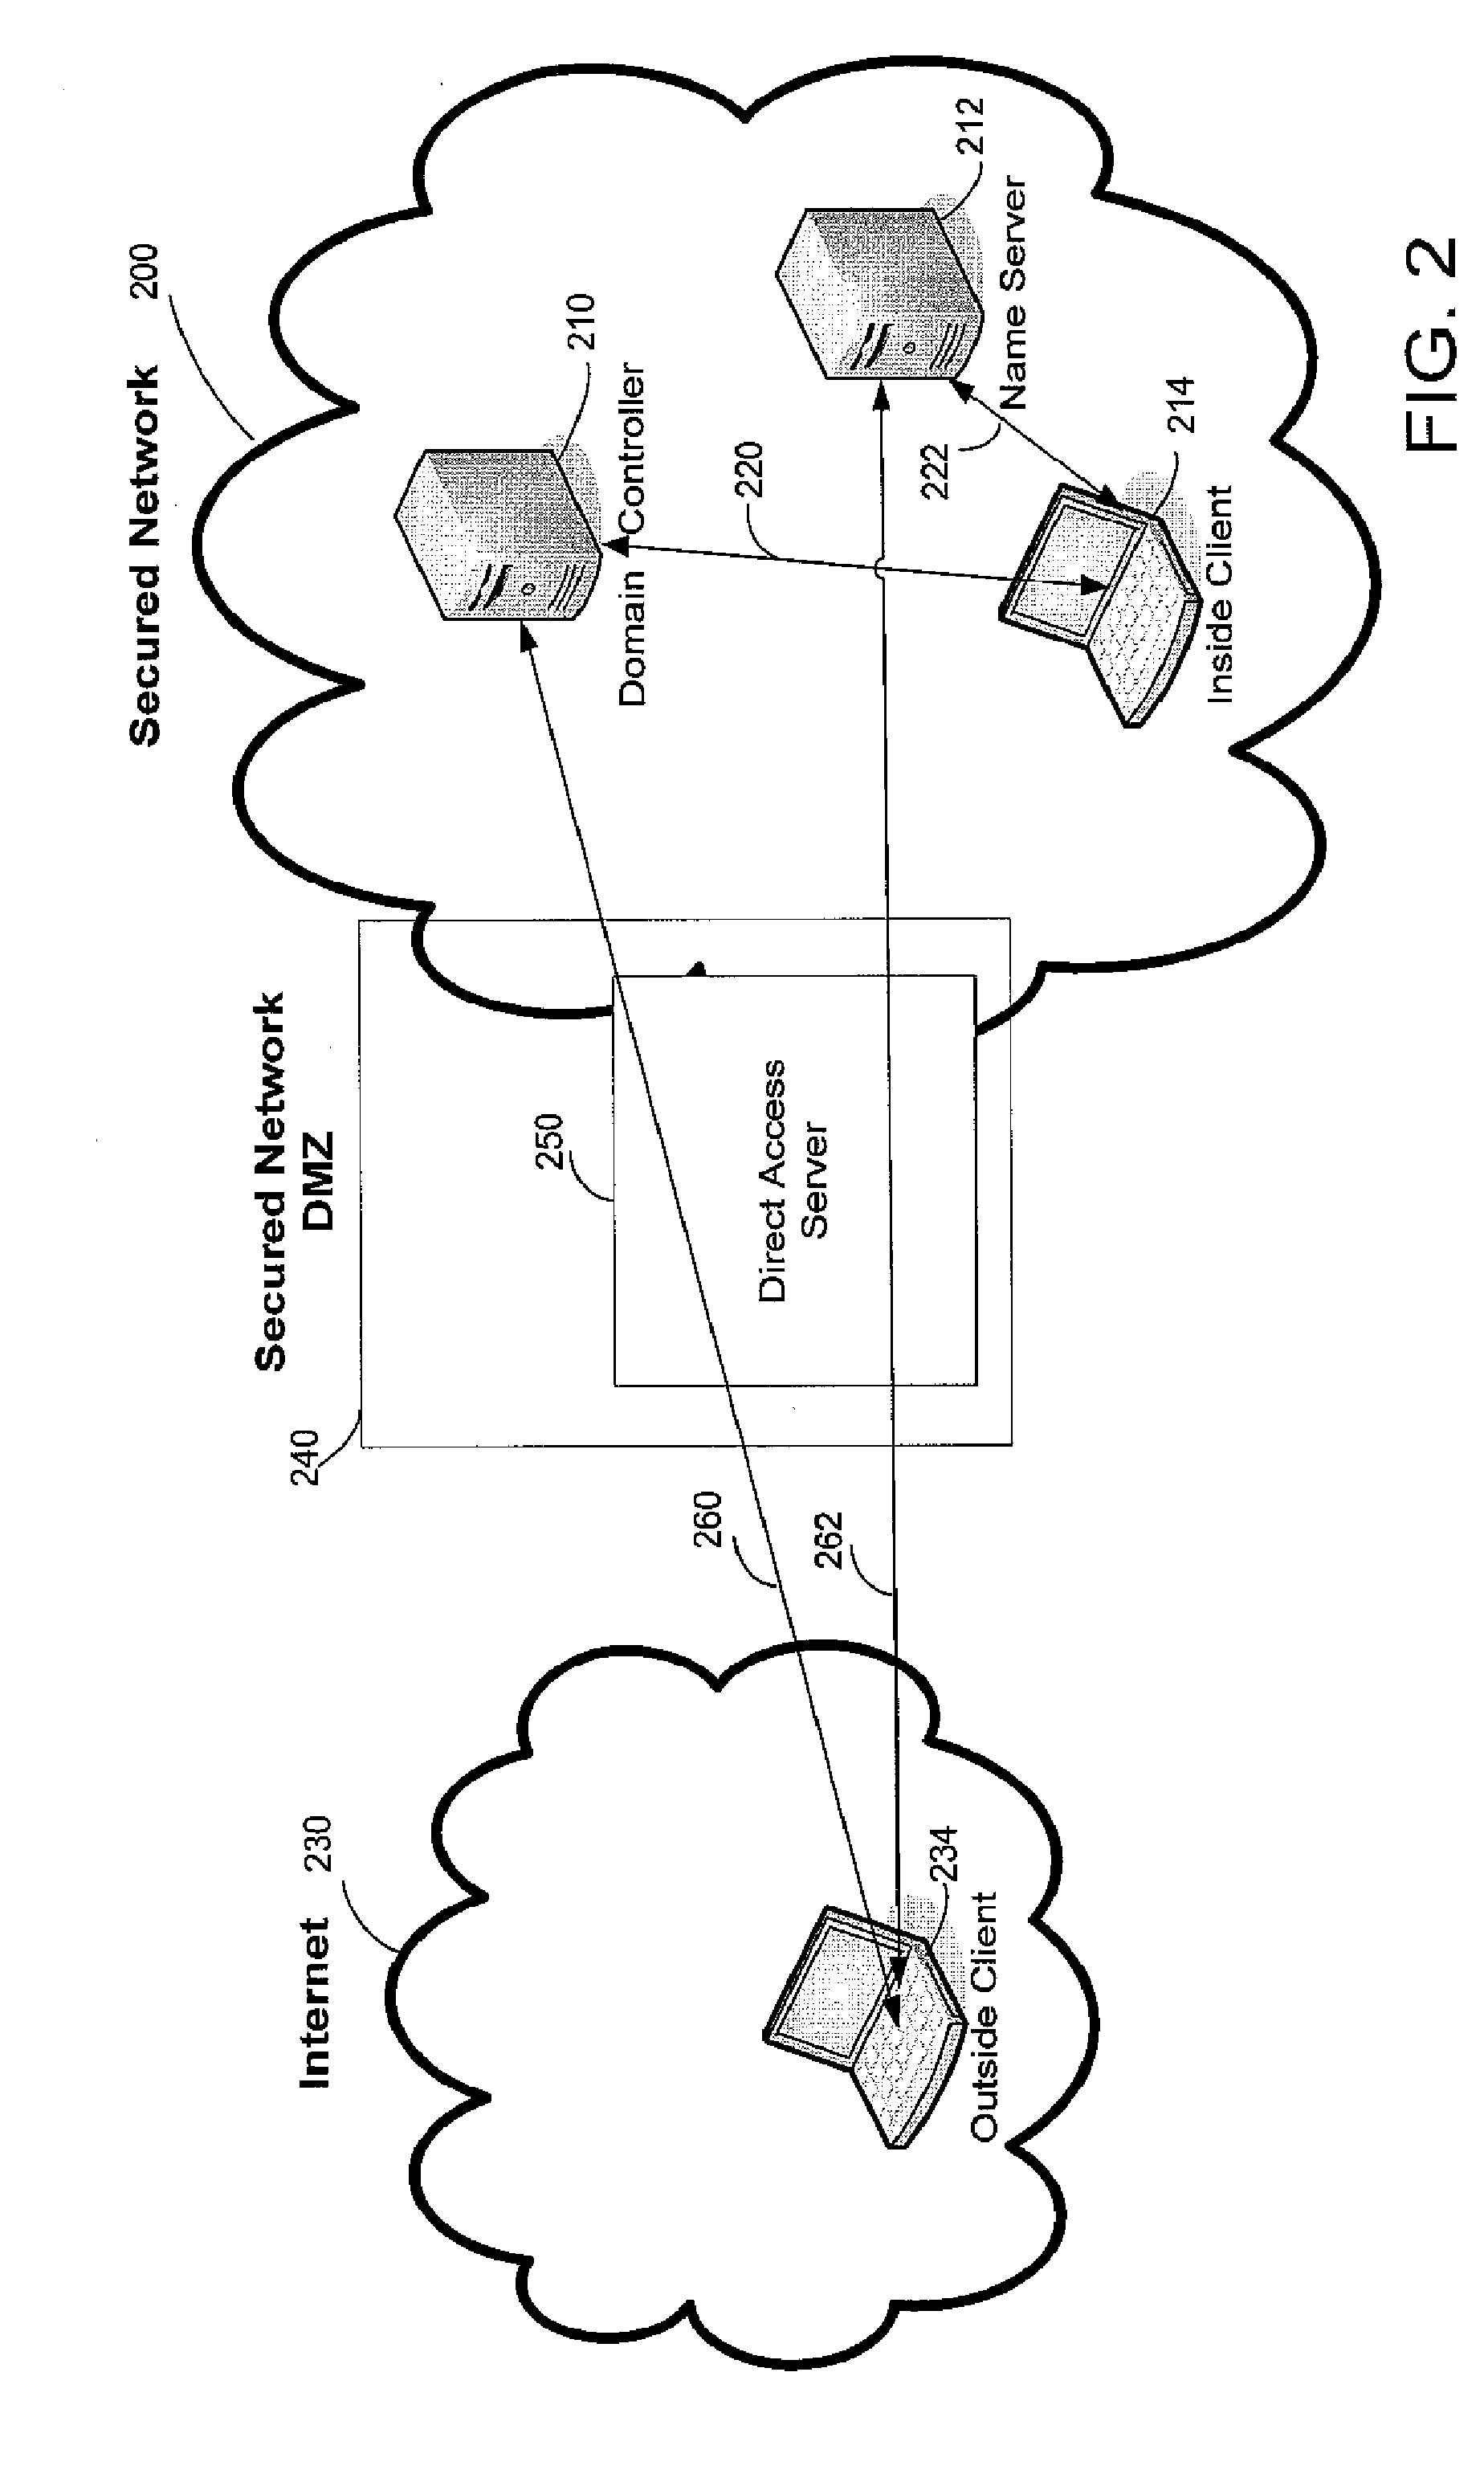 Network location determination for direct access networks